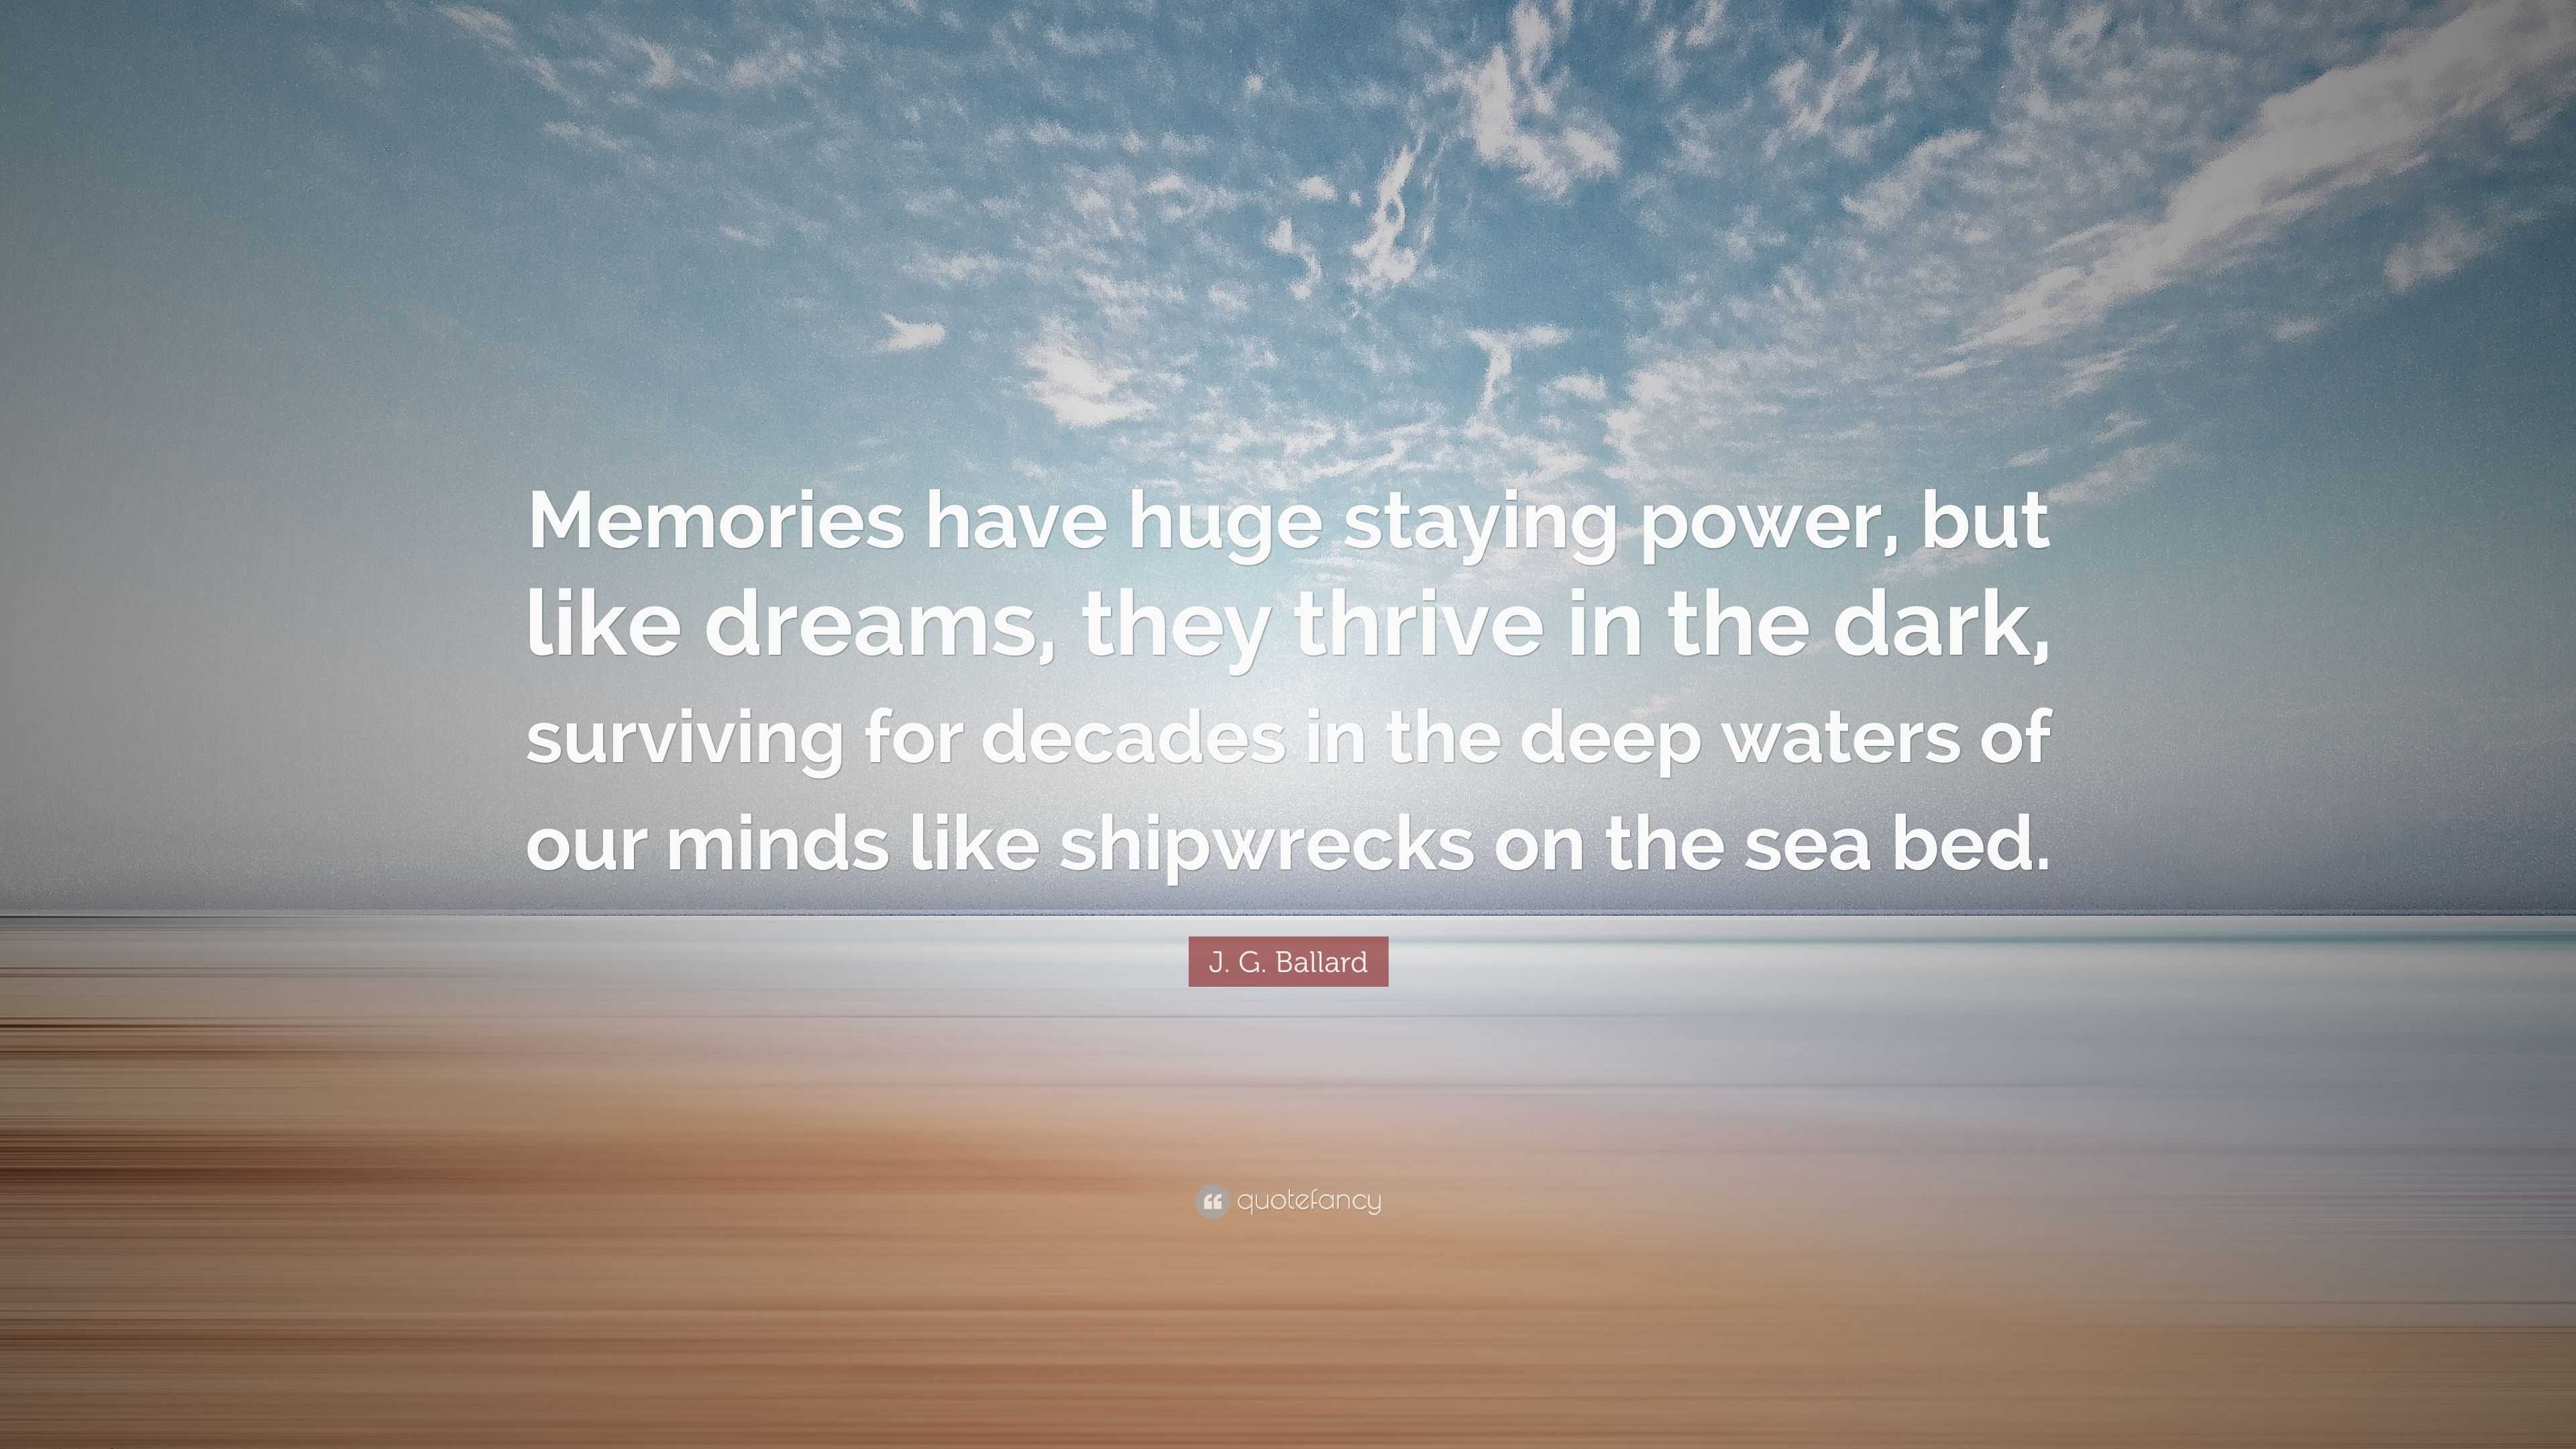 J. G. Ballard Quote: “Memories have huge staying power, but like